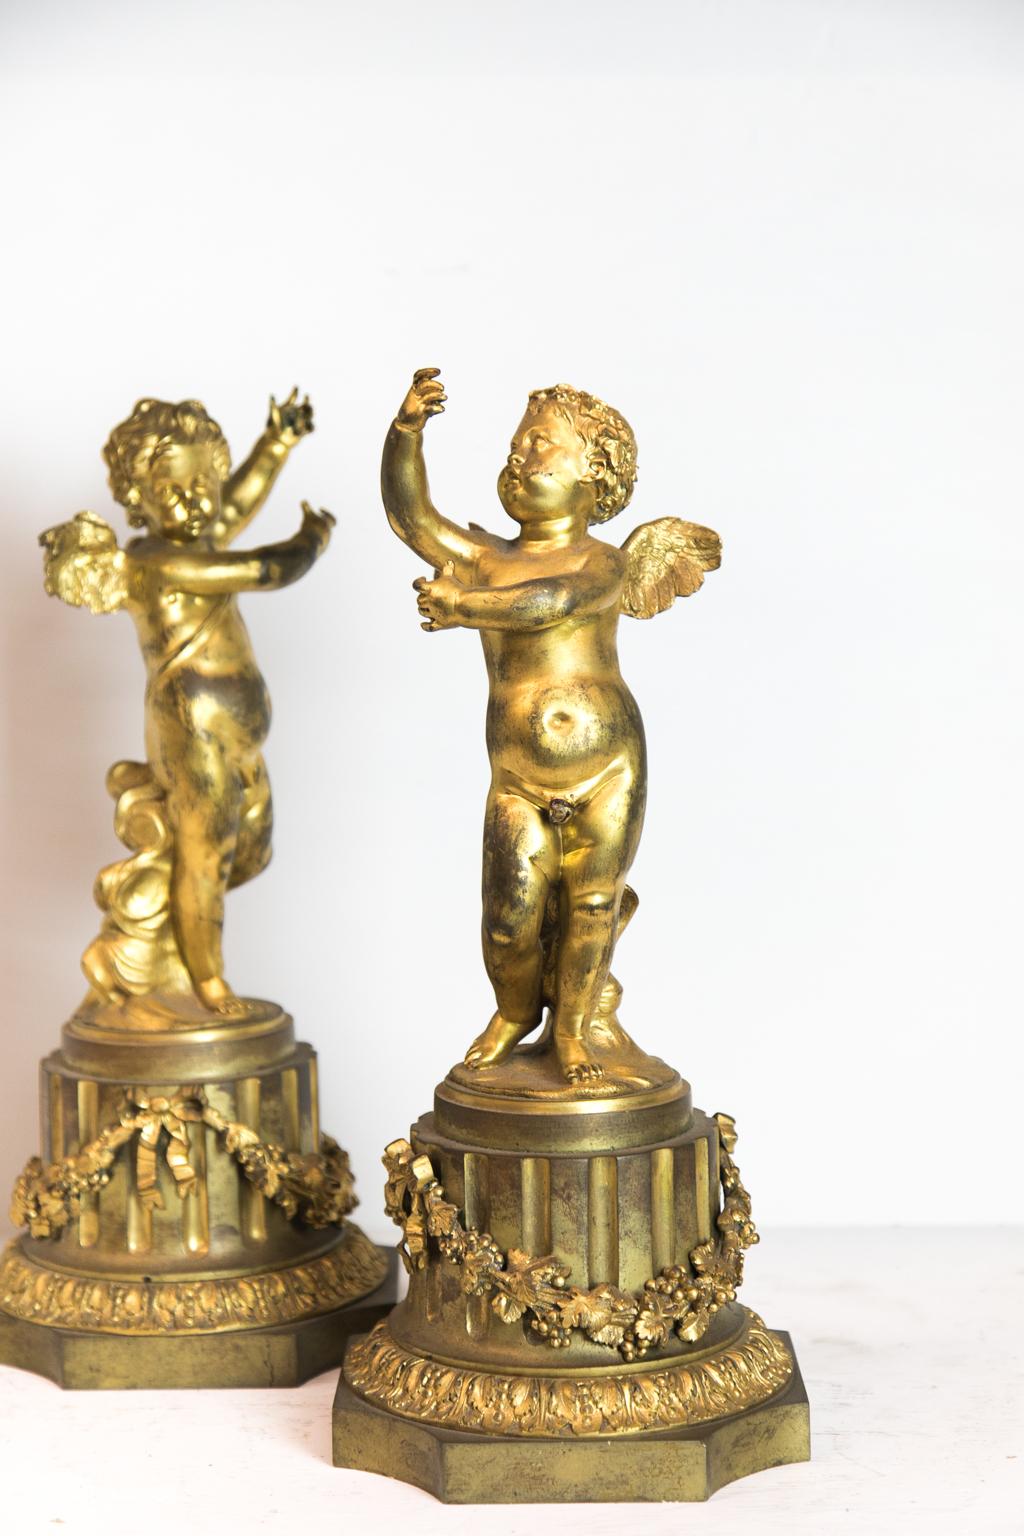 Pair of French ormolu cupids, standing on a fluted column base draped with grapevine swags and acanthus base molding.